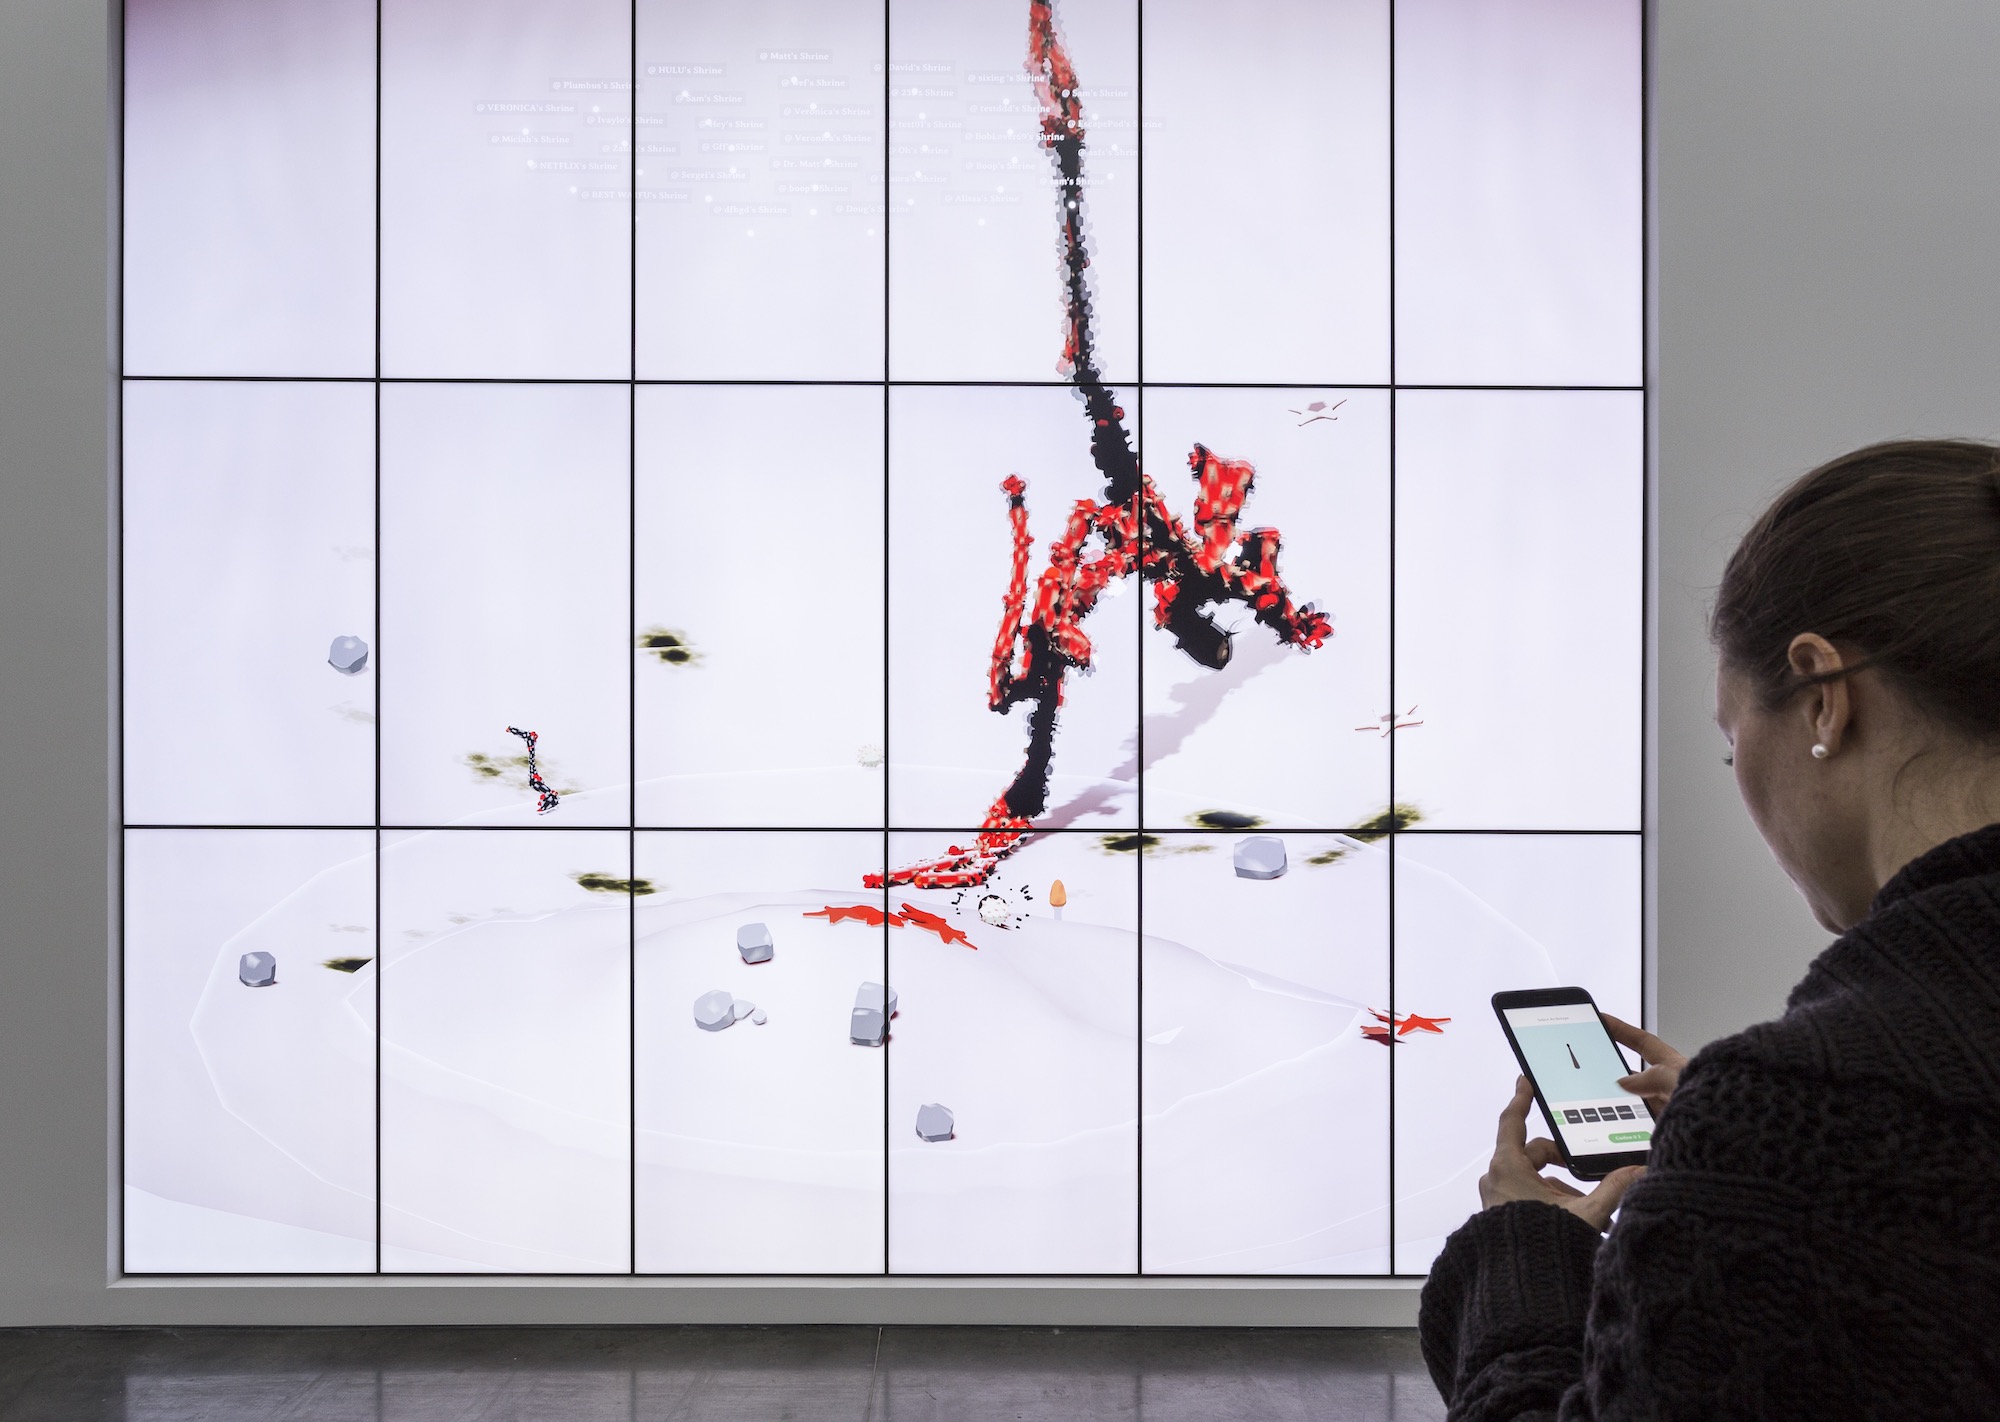 Image of a screen with a grid, a red expanding figure, and various debris. A woman in the lower right corner is looking at her phone.